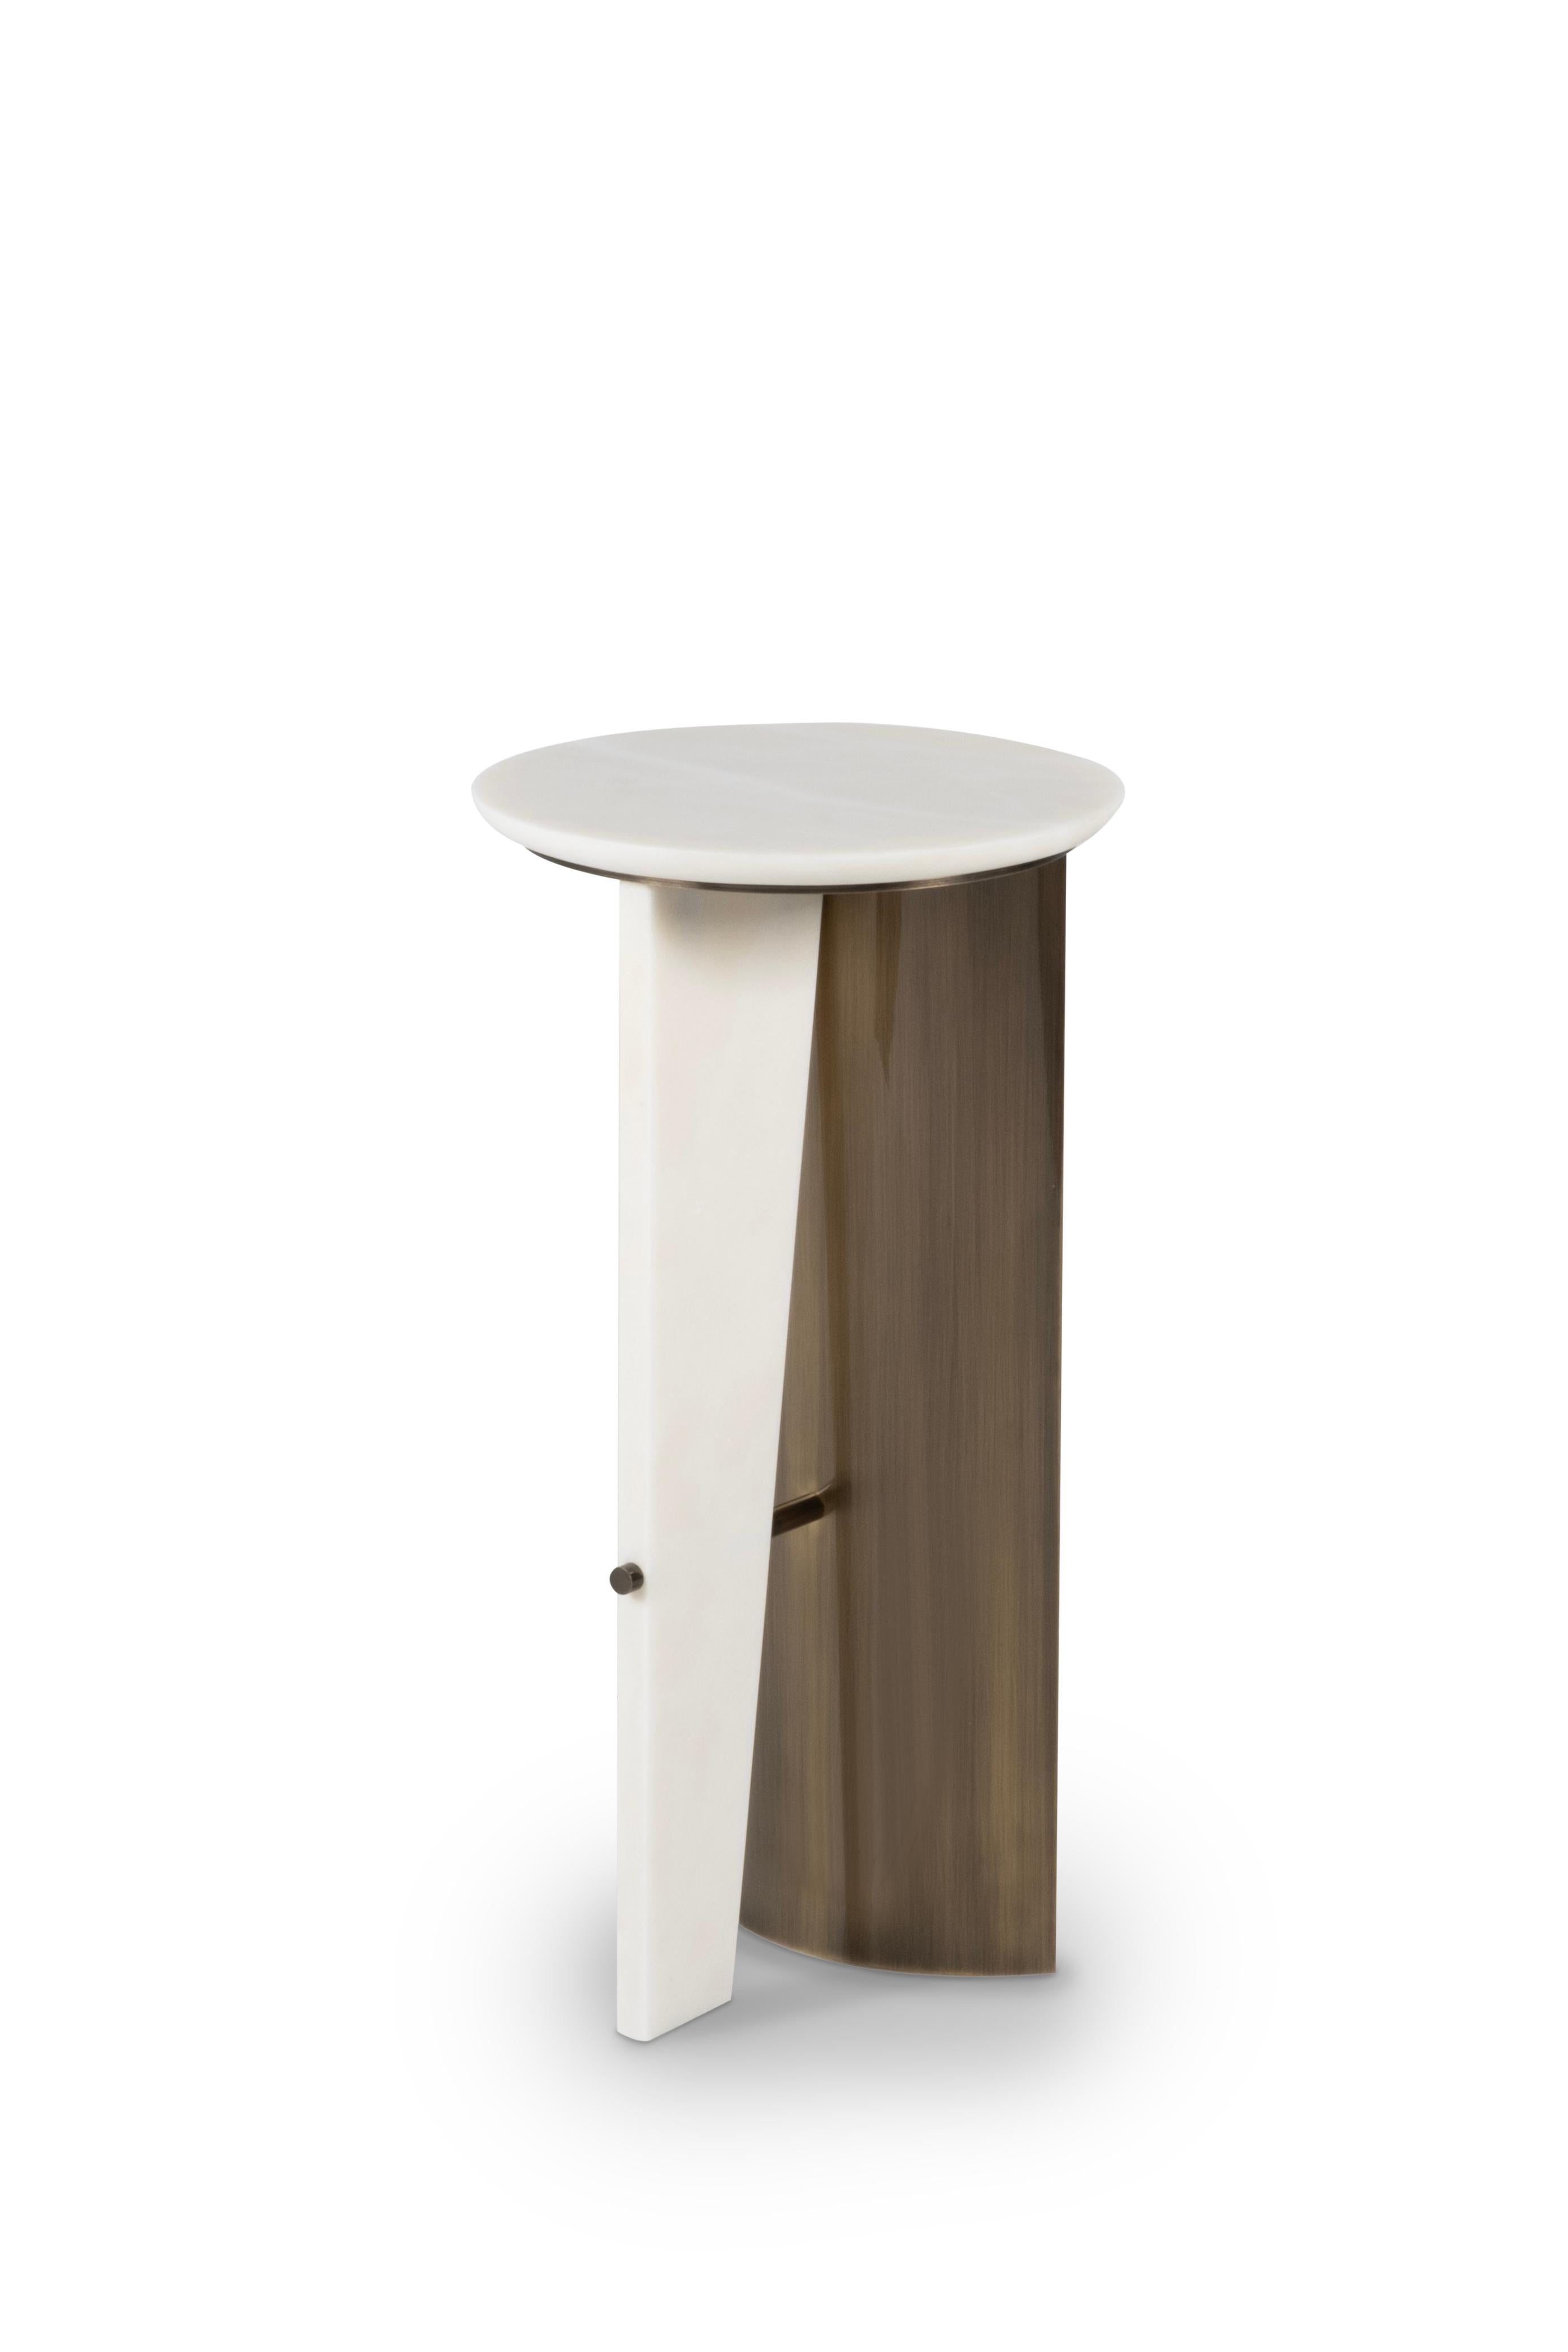 Portuguese Modern Foice Side Table, Calacatta Marble Brass, Handmade Portugal by Greenapple For Sale